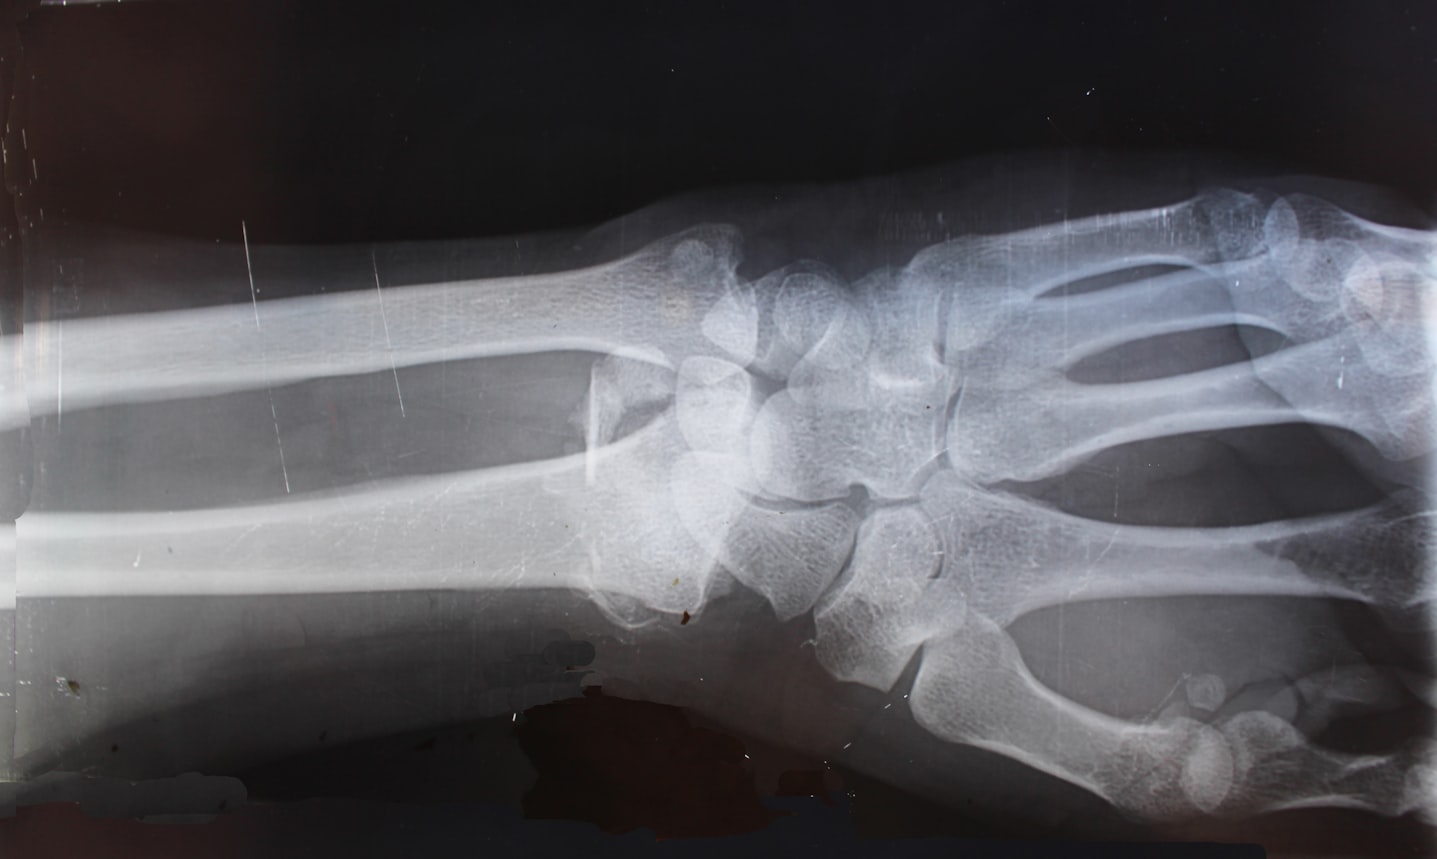 Example of an x-ray image